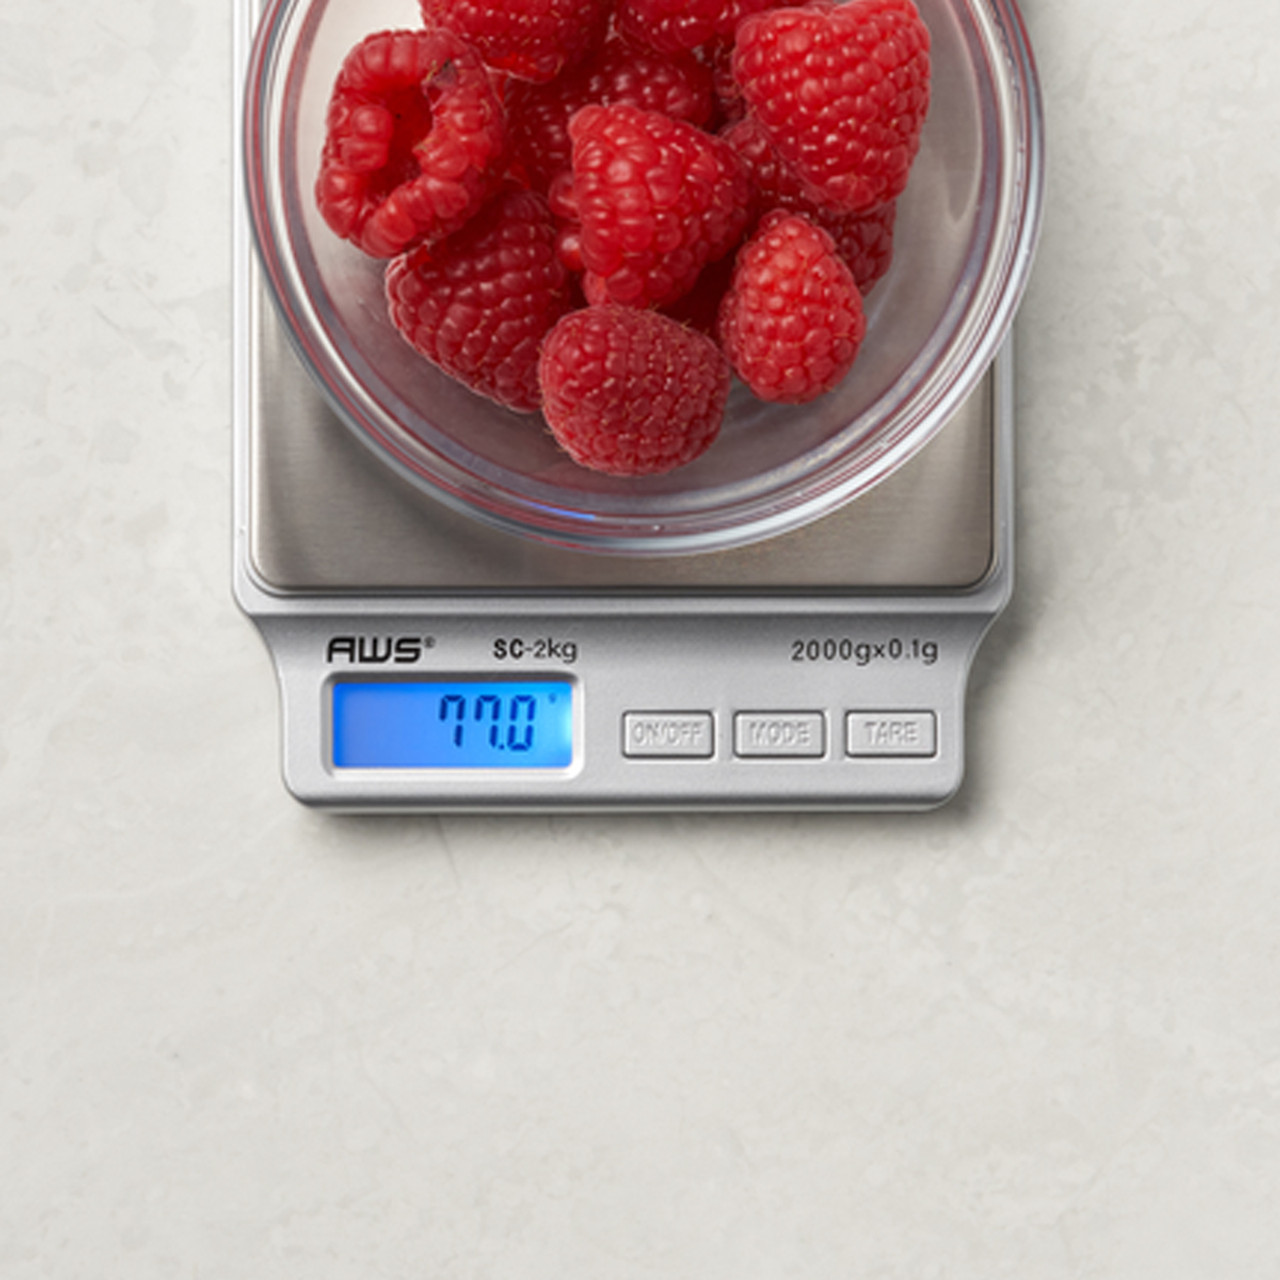 American Weigh Scales S Card Series Compact High Precision